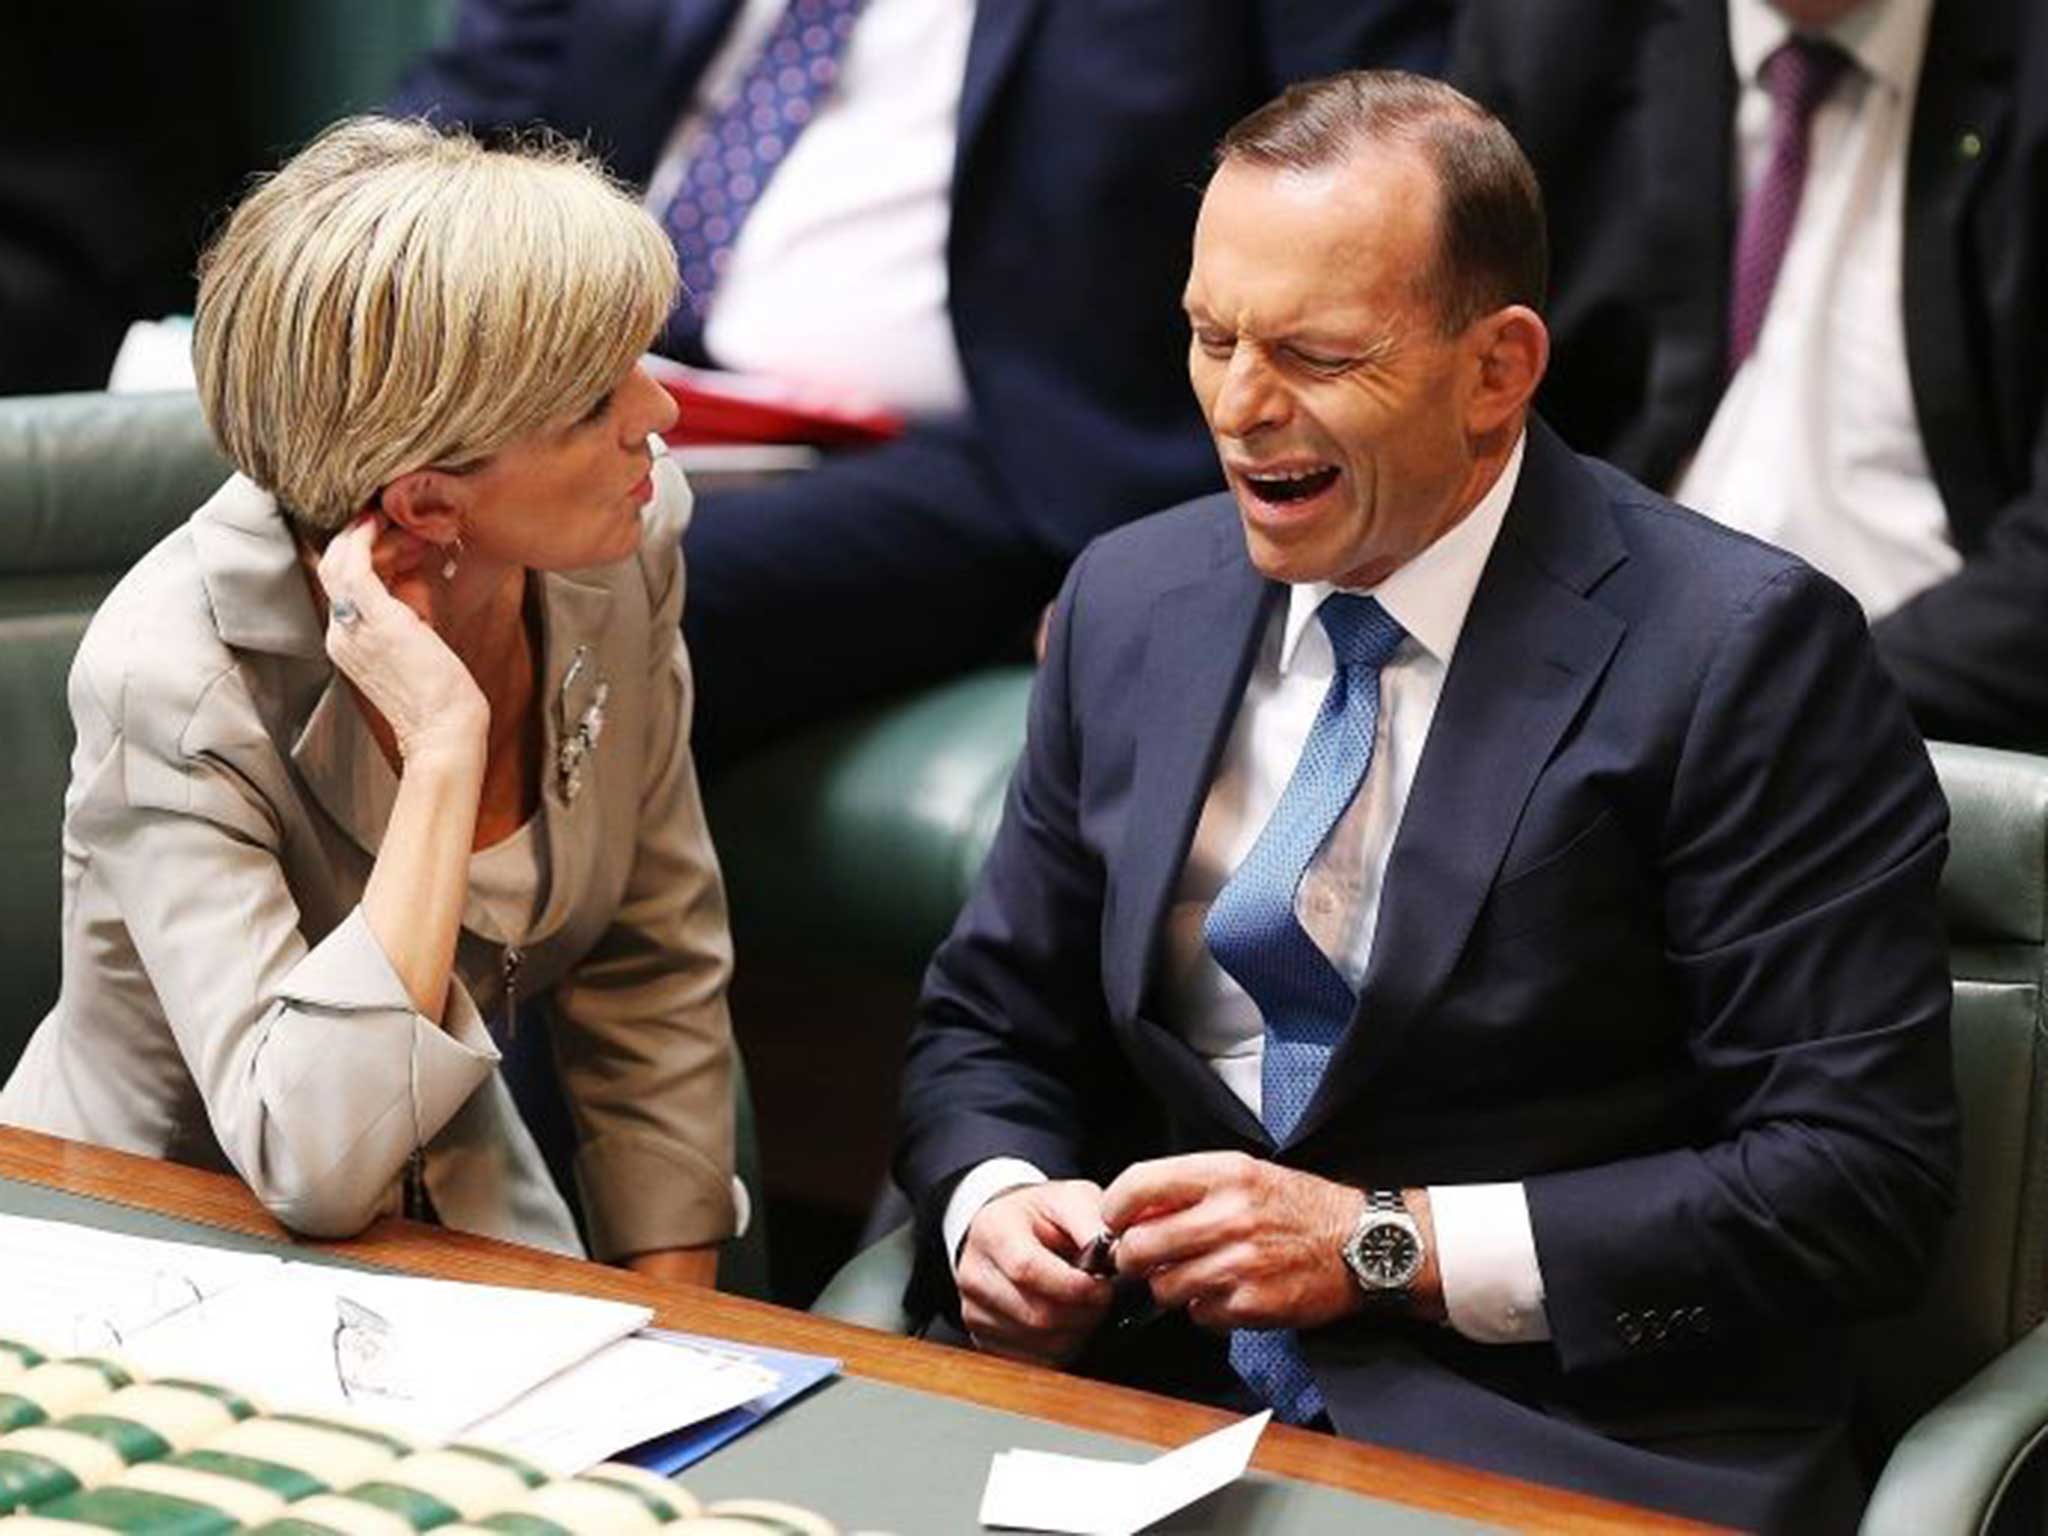 Gaffe-prone Australian PM Tony Abbott may have see off a threat from his own backbenchers amid rumblings of discontent